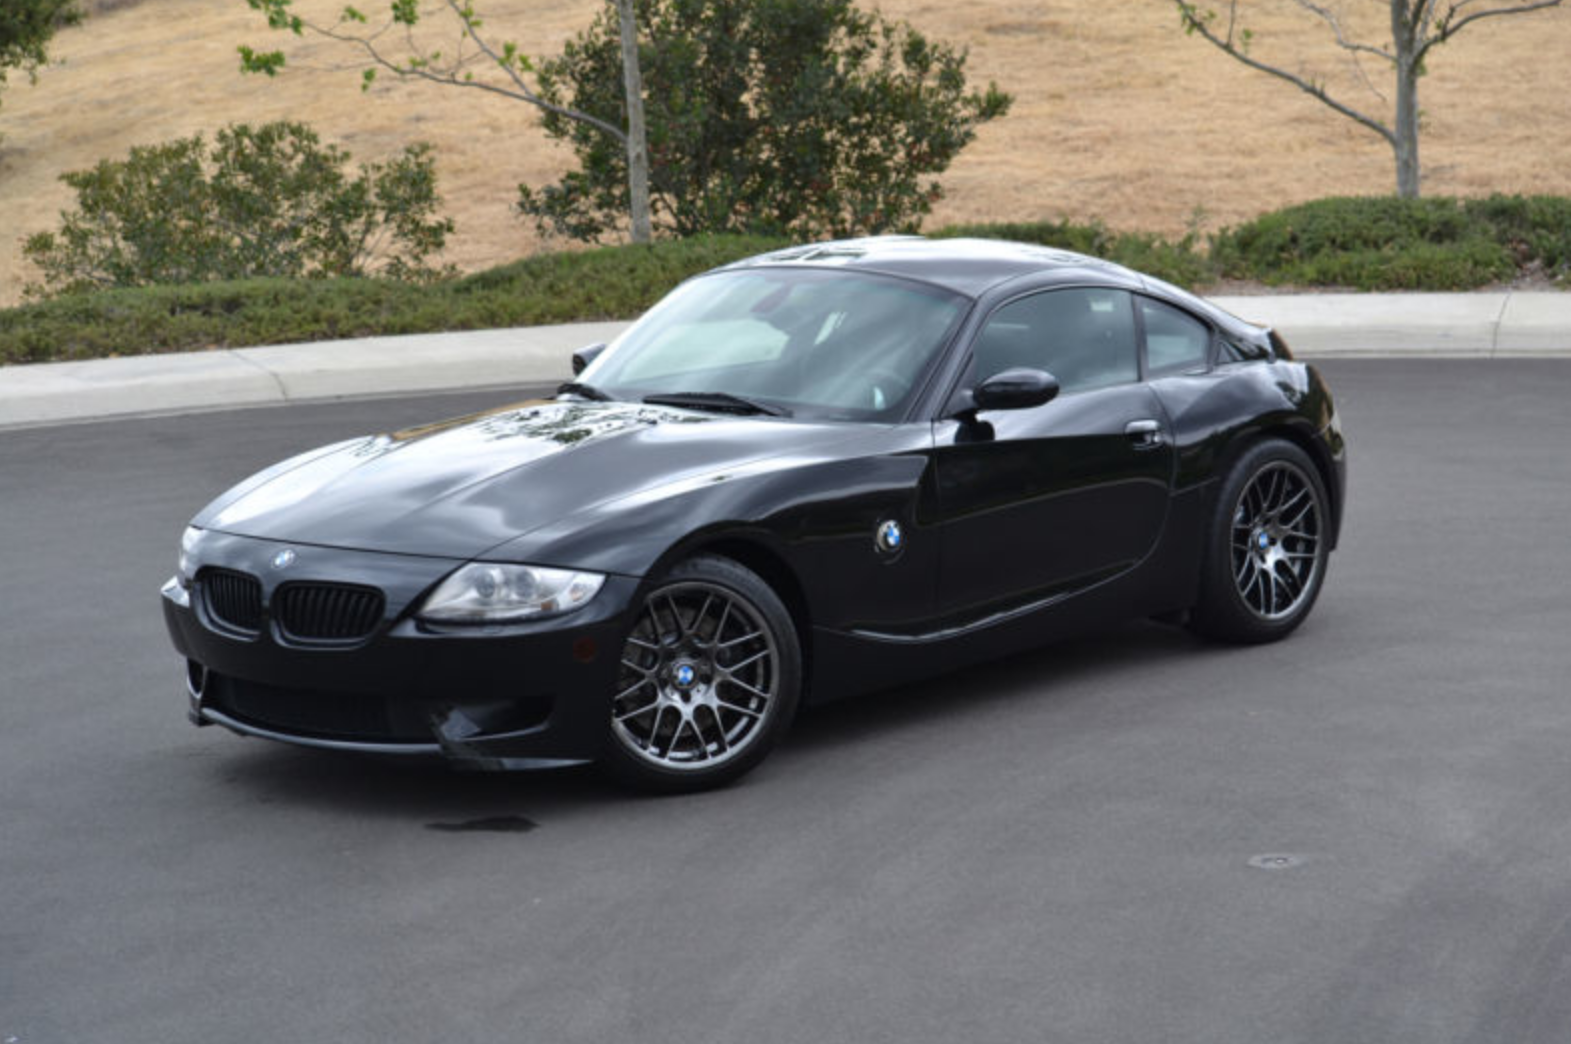 07 Z4 M Coupe German Cars For Sale Blog